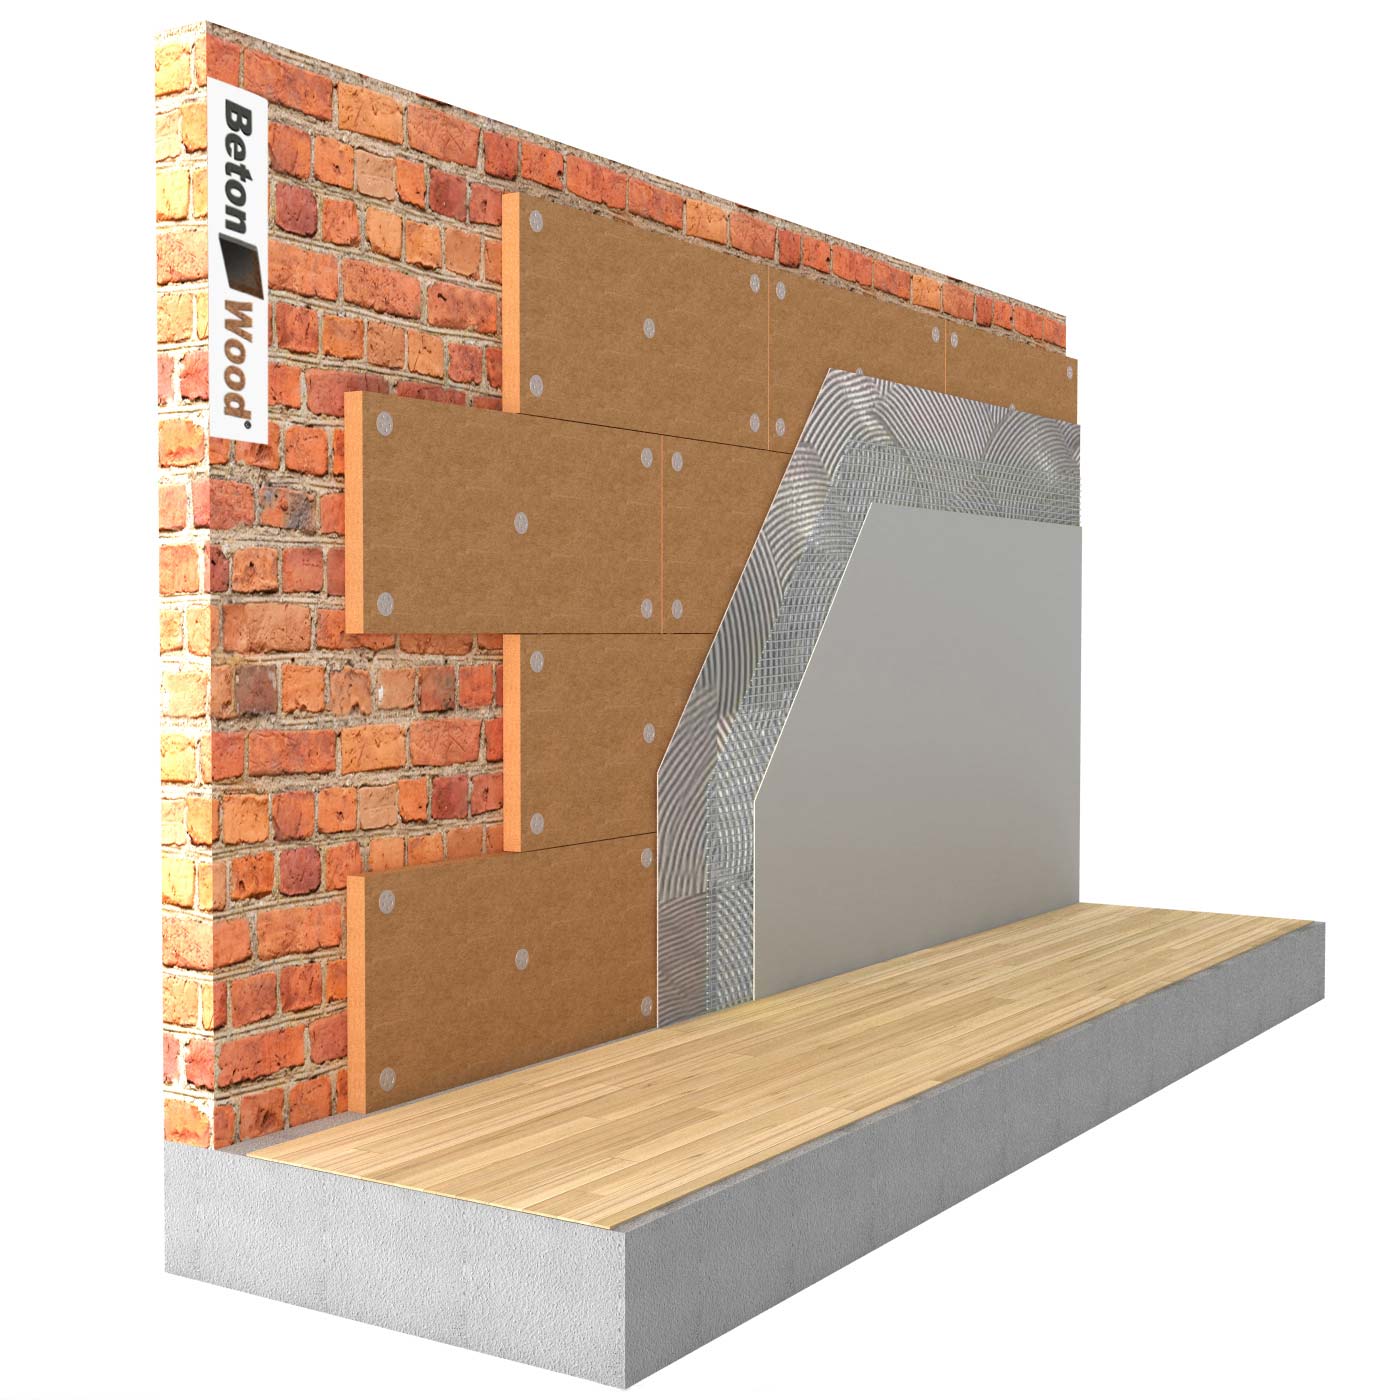 Internal thermal insulation system in Protect Wood fibre board